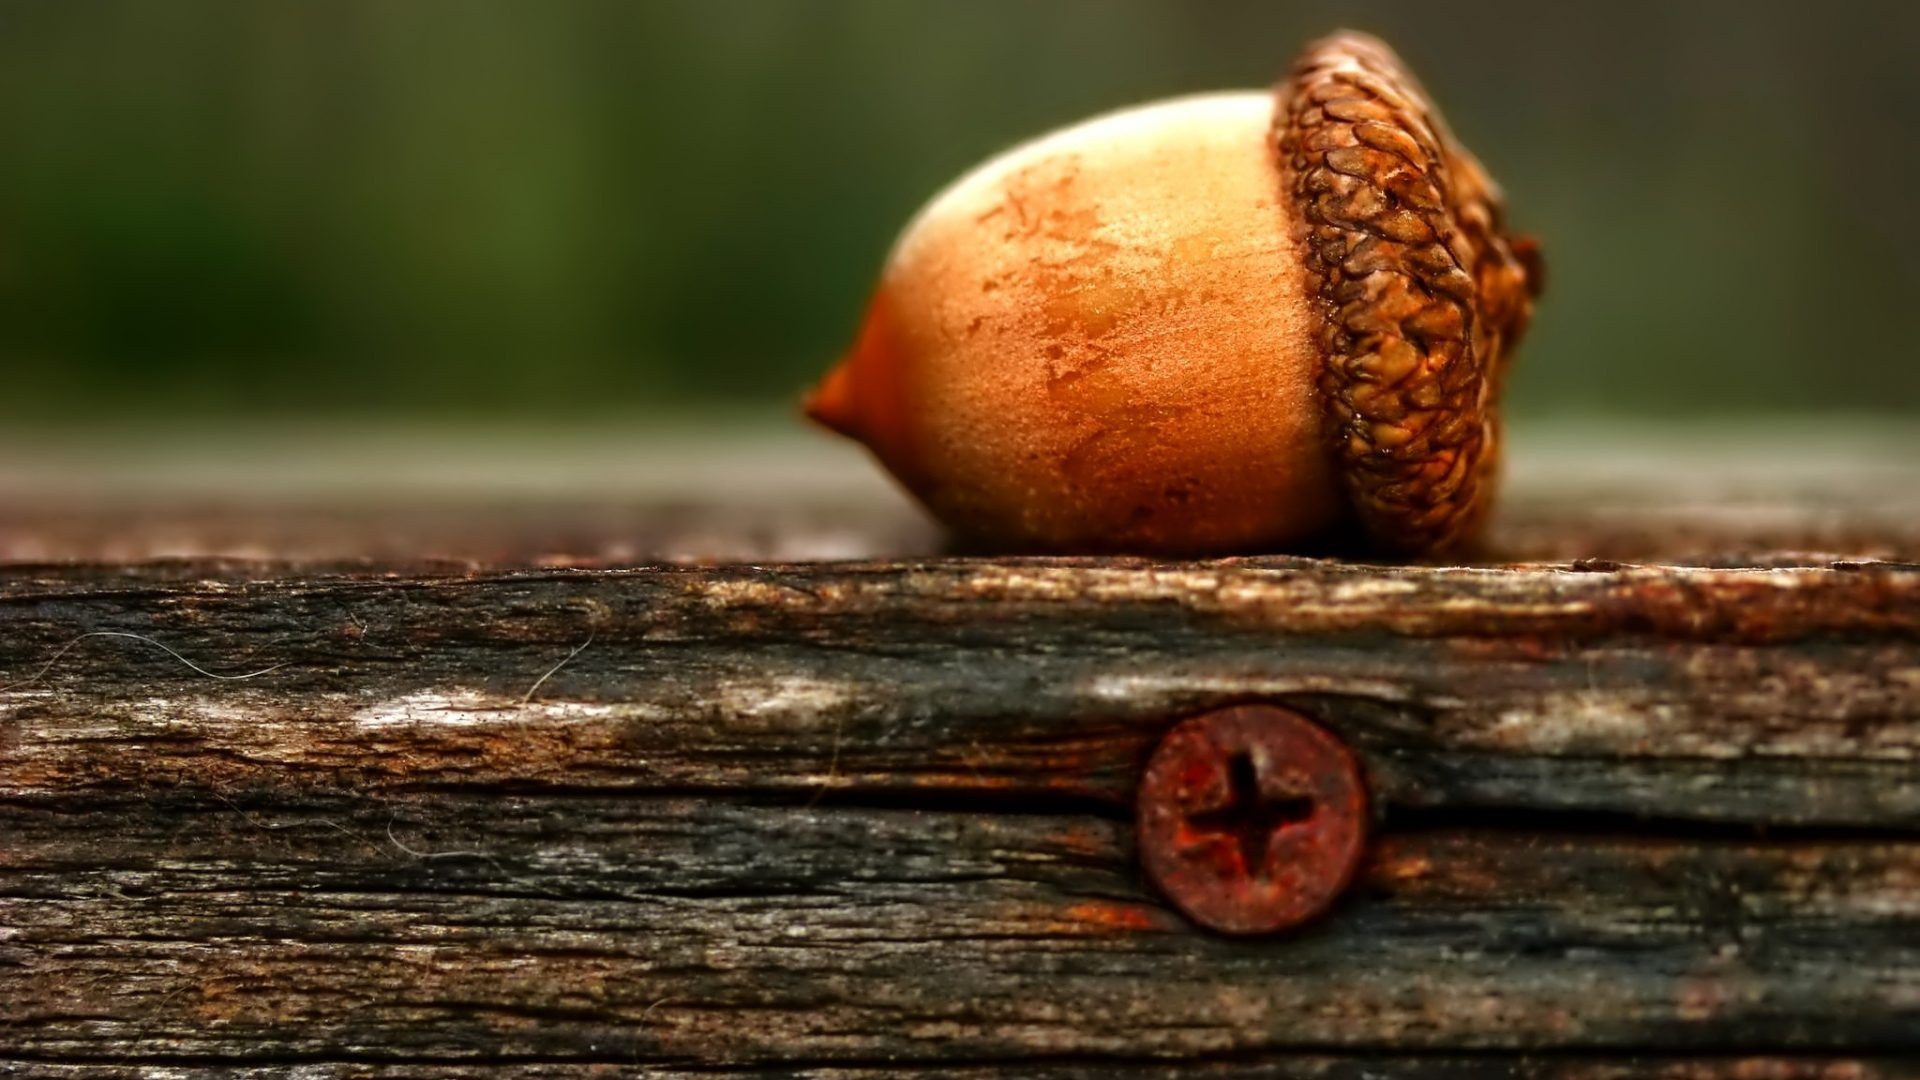 Shared acorn wallpapers, Samantha Johnson's collection, Impressive imagery, Diverse selection, 1920x1080 Full HD Desktop